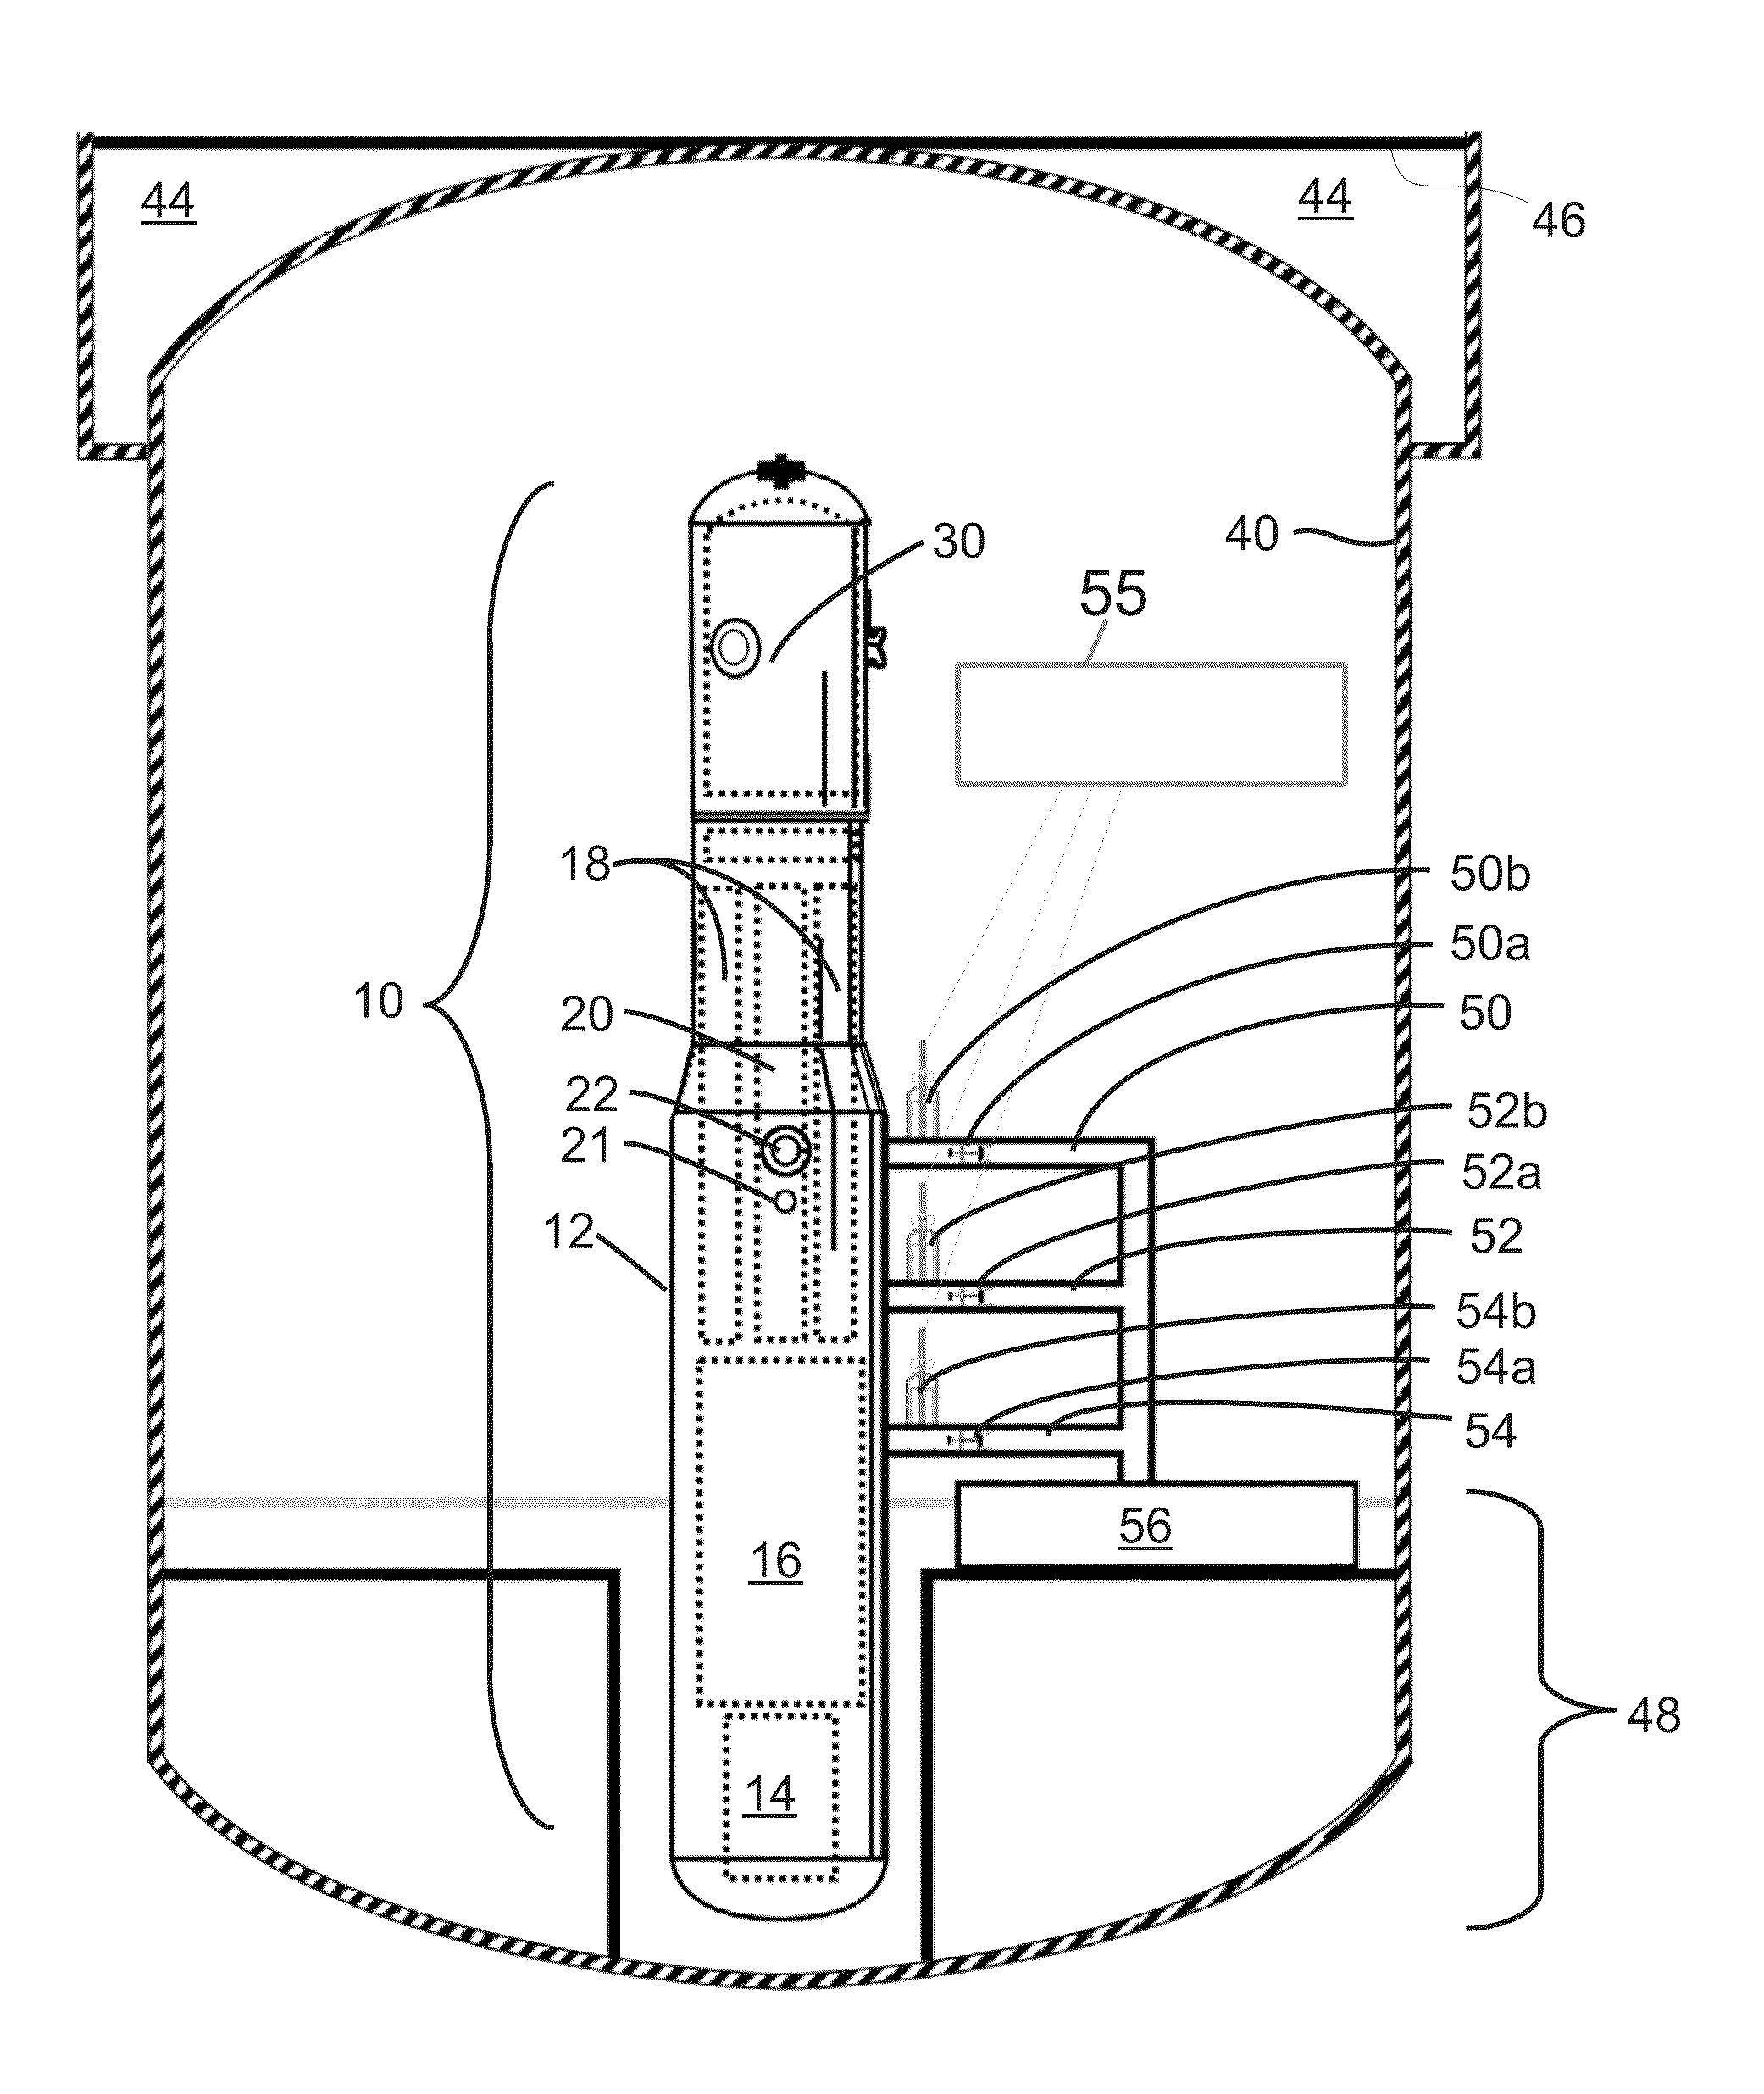 Passively initiated depressurization for light water reactor